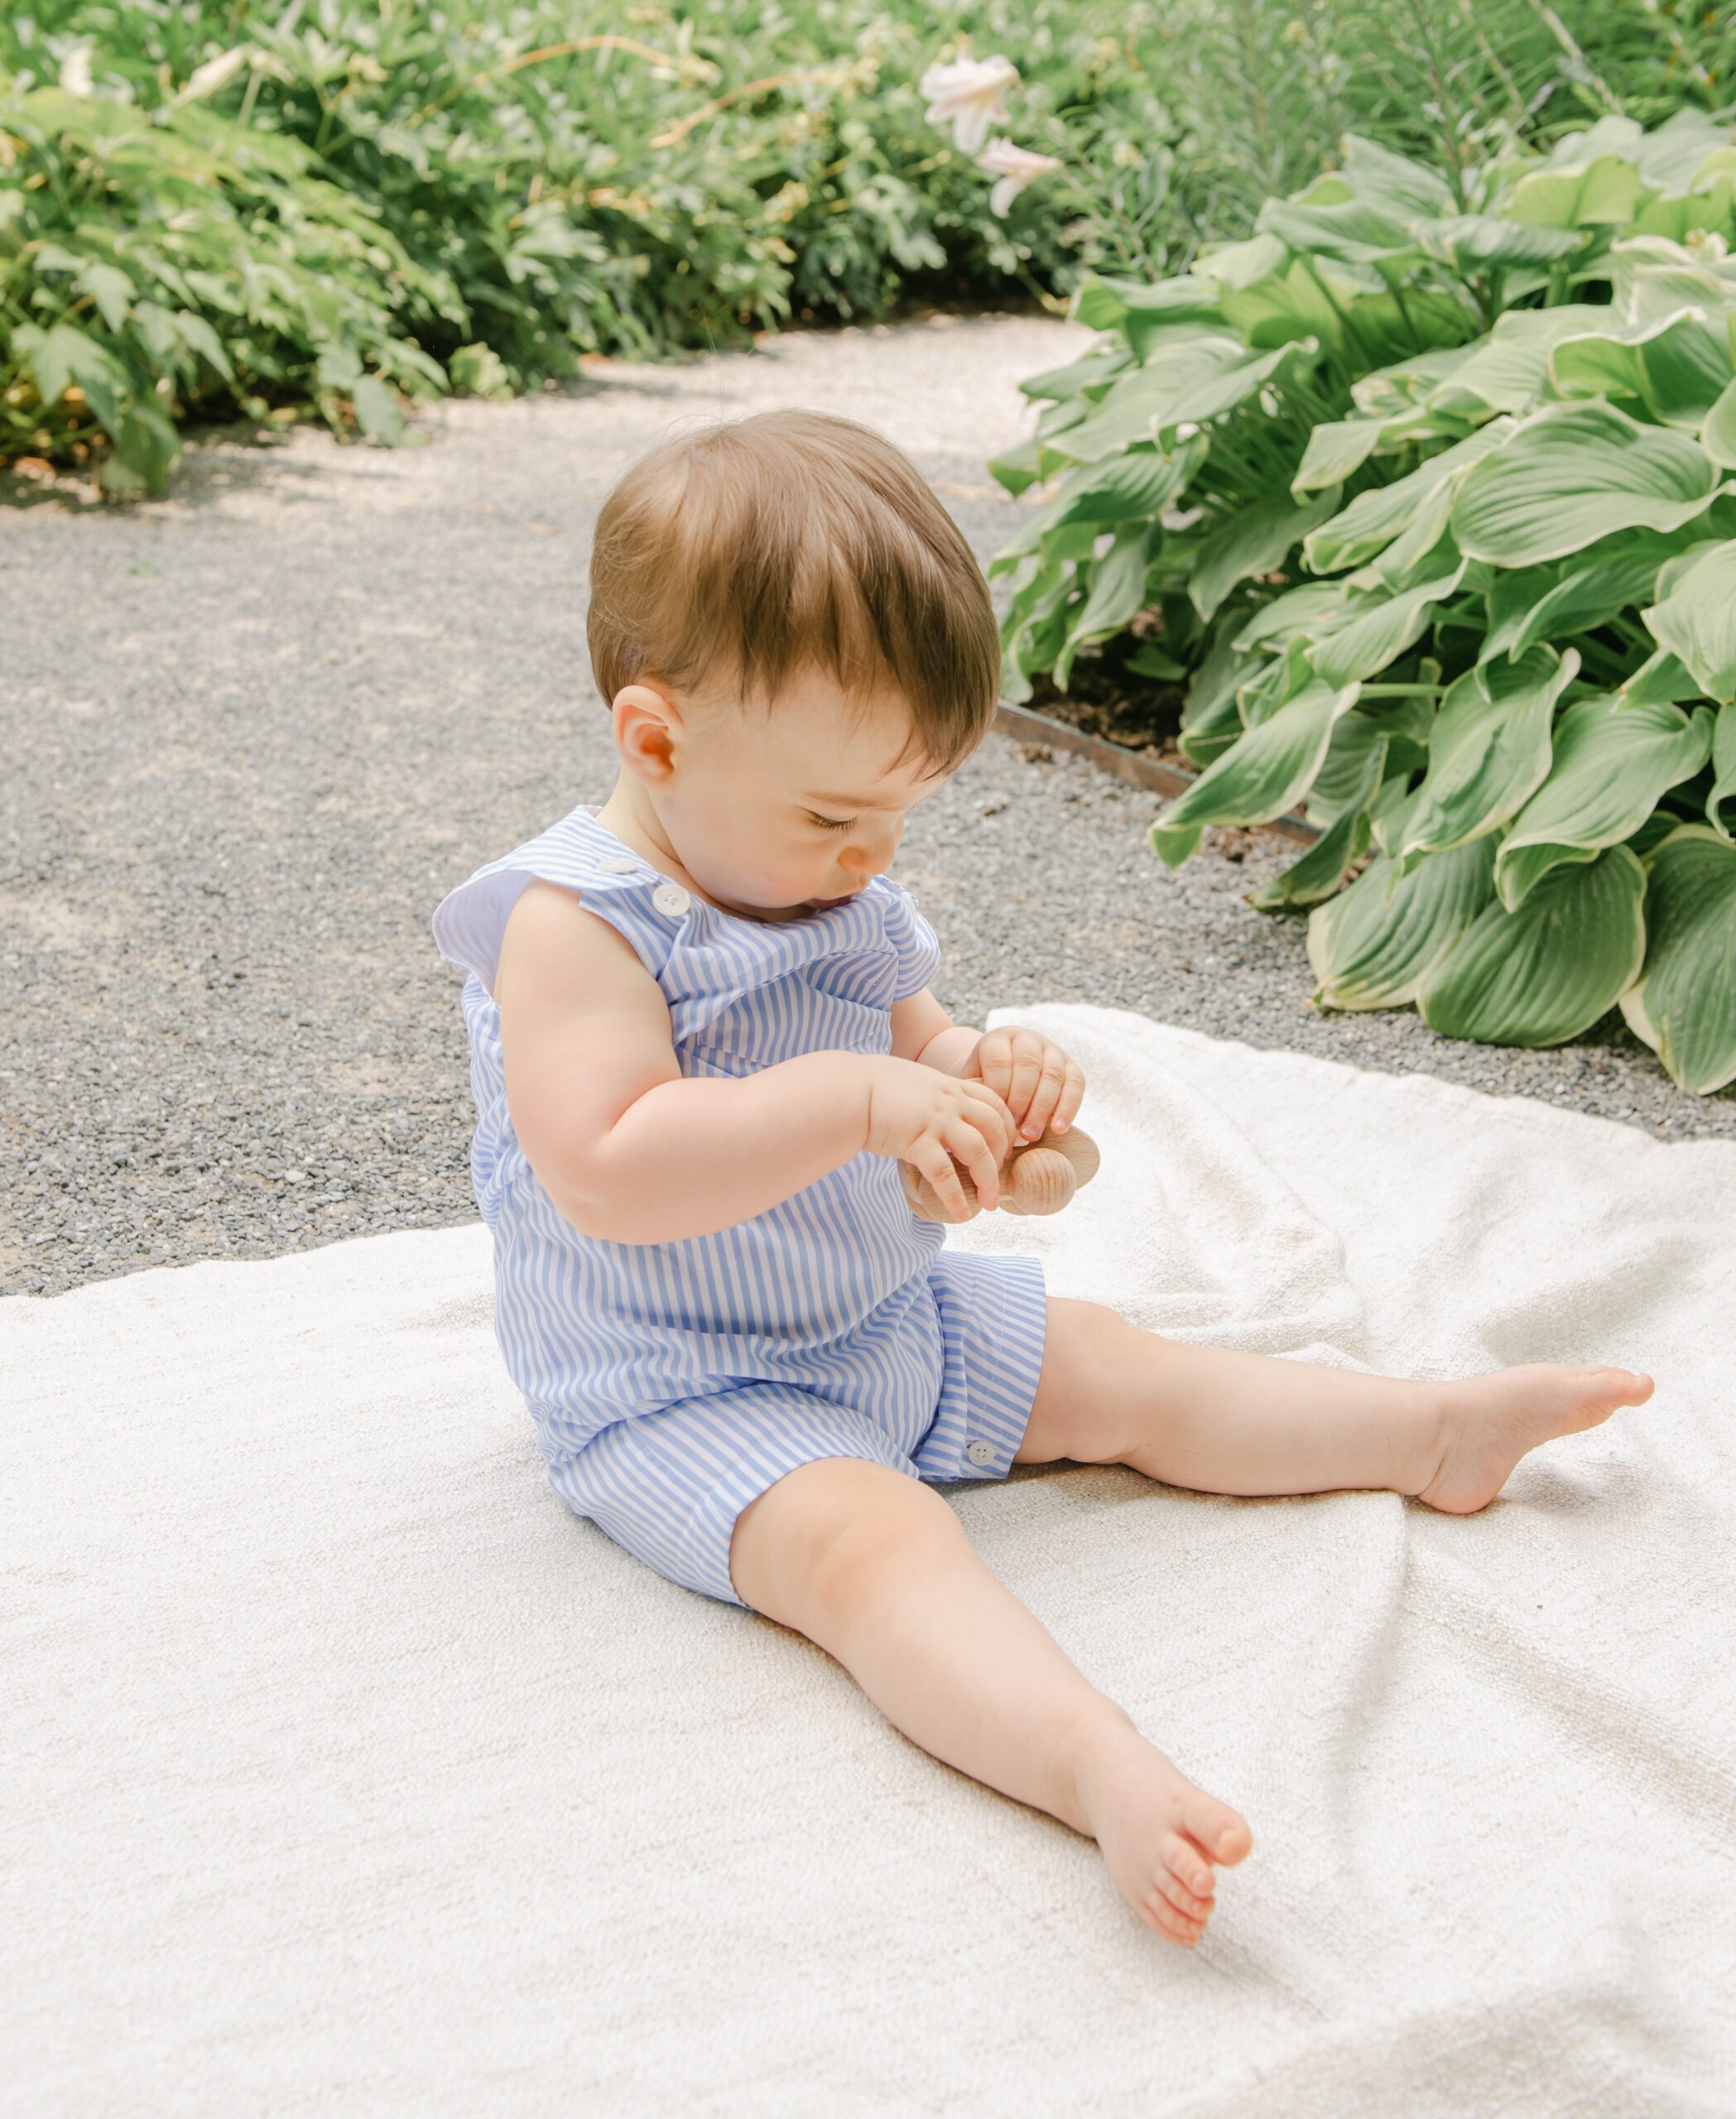 An infant boy sits on a blanket in a gravel garden path playing with a wooden toy